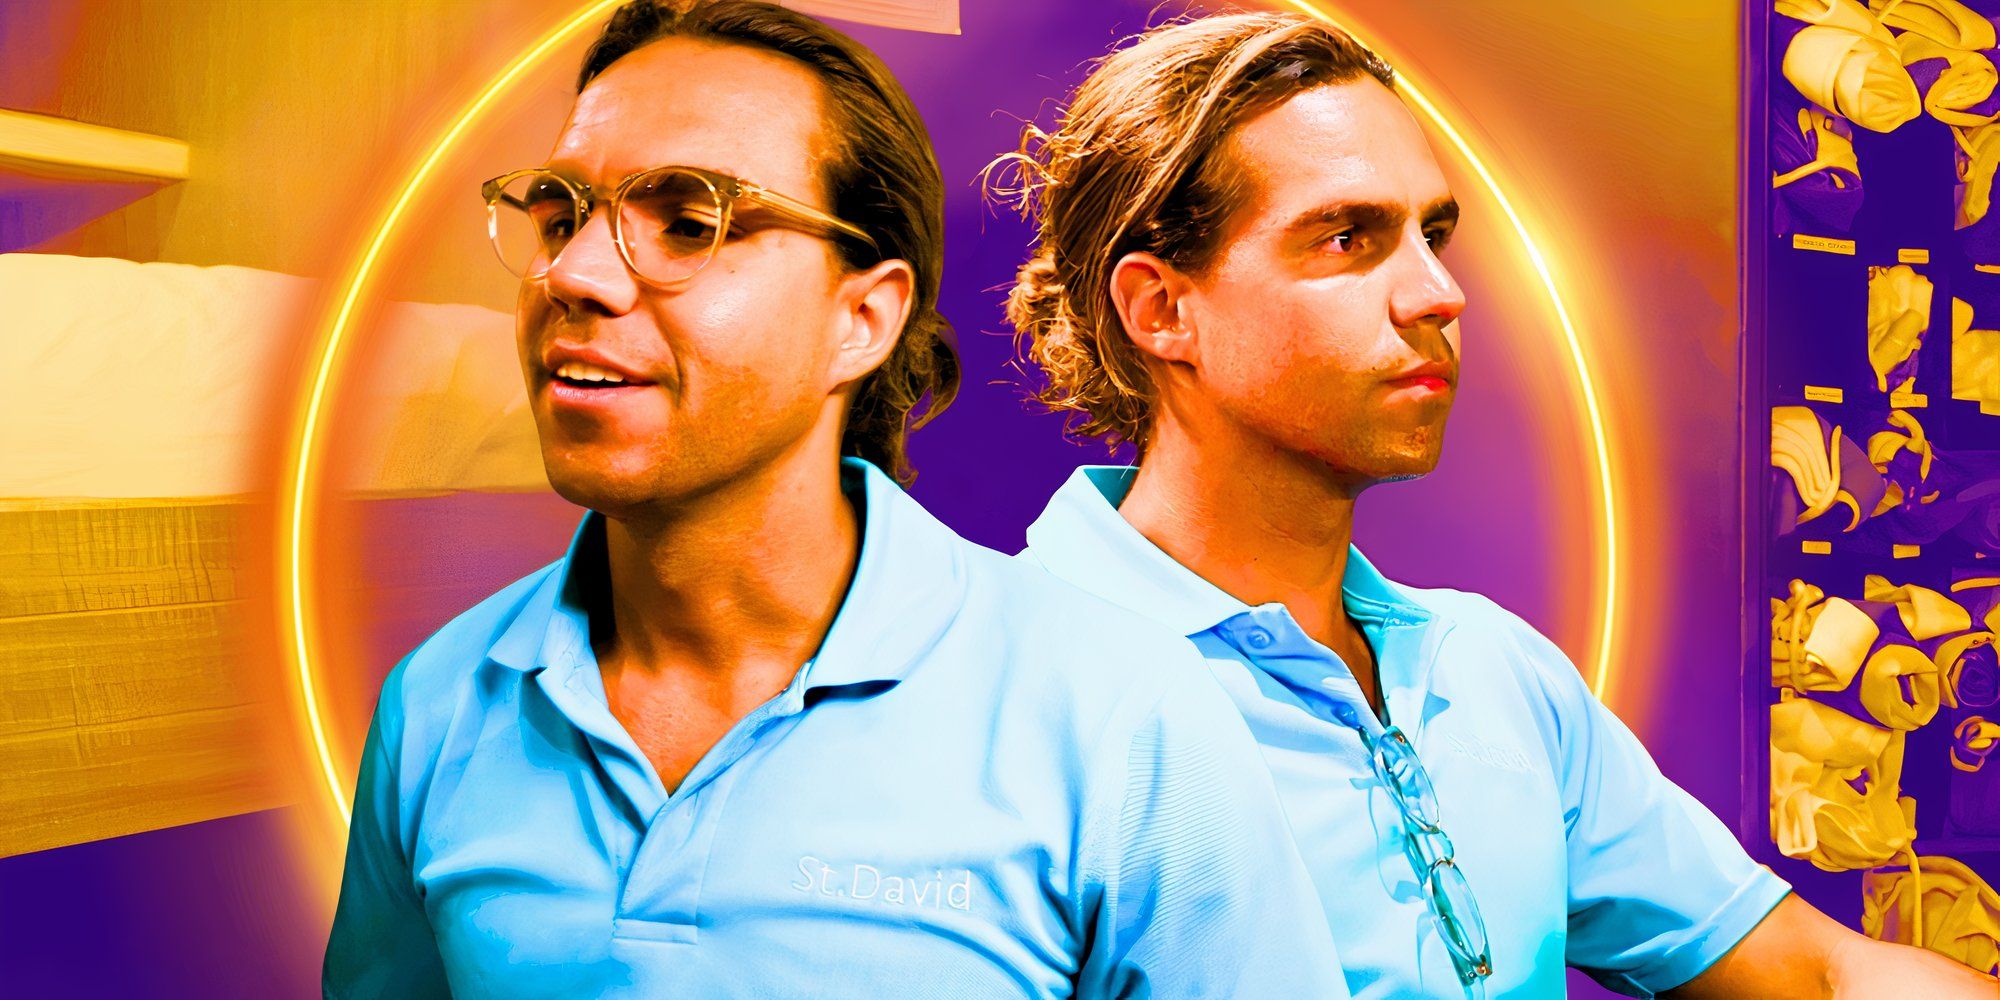 Ben Willoughby from Below Deck in montage featuring two shots of him in blue shirts and a purple and yellow backgrounds